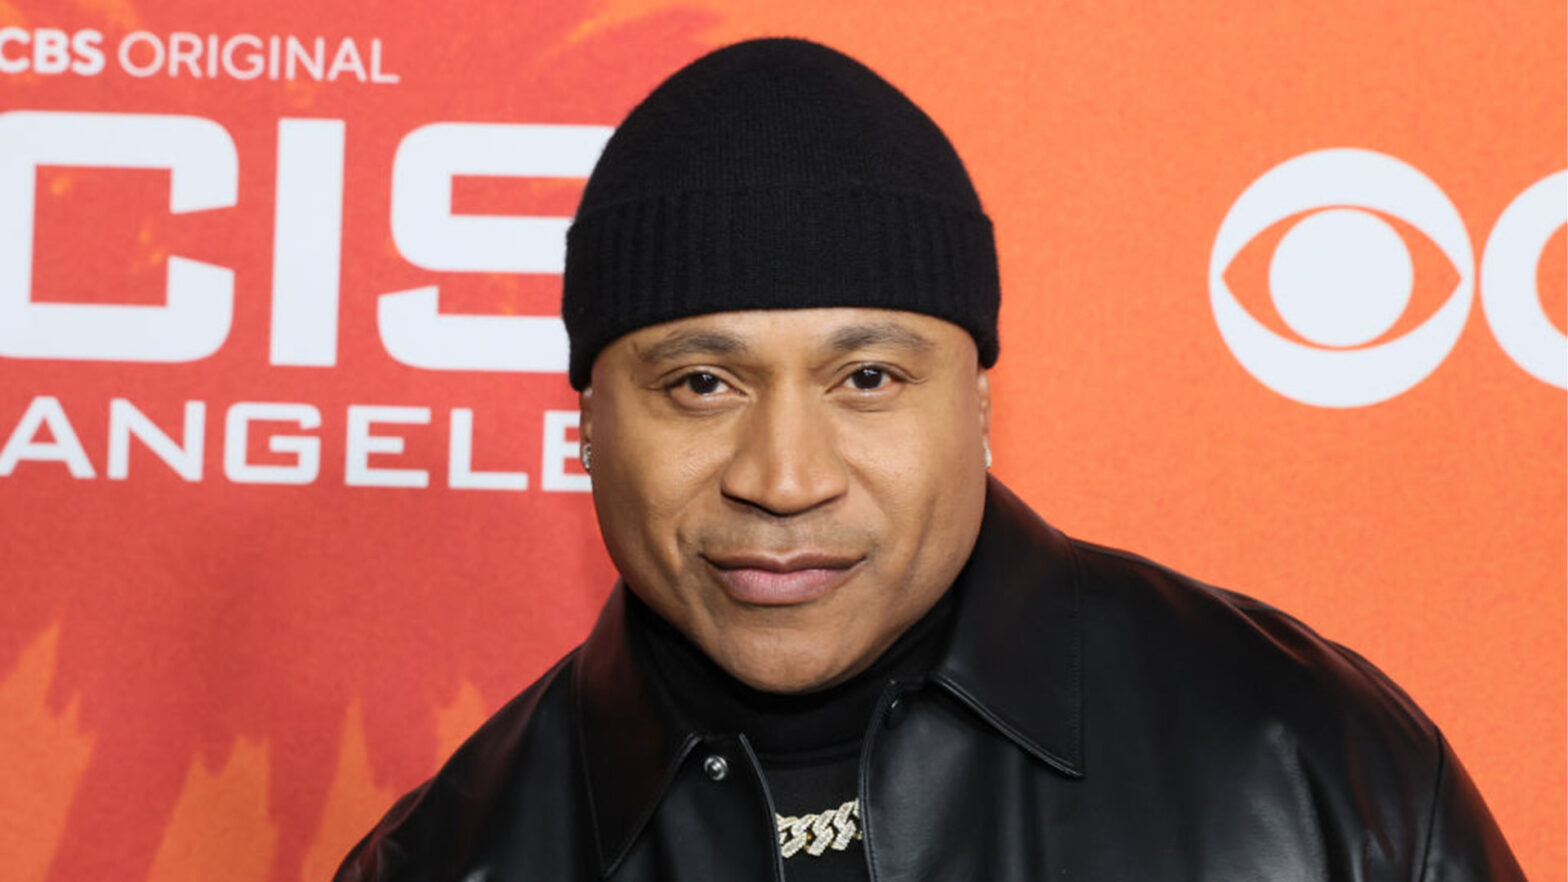 LL COOL J's Rock The Bells Closes $15M Series B Funding Round, Partners With Paramount Global